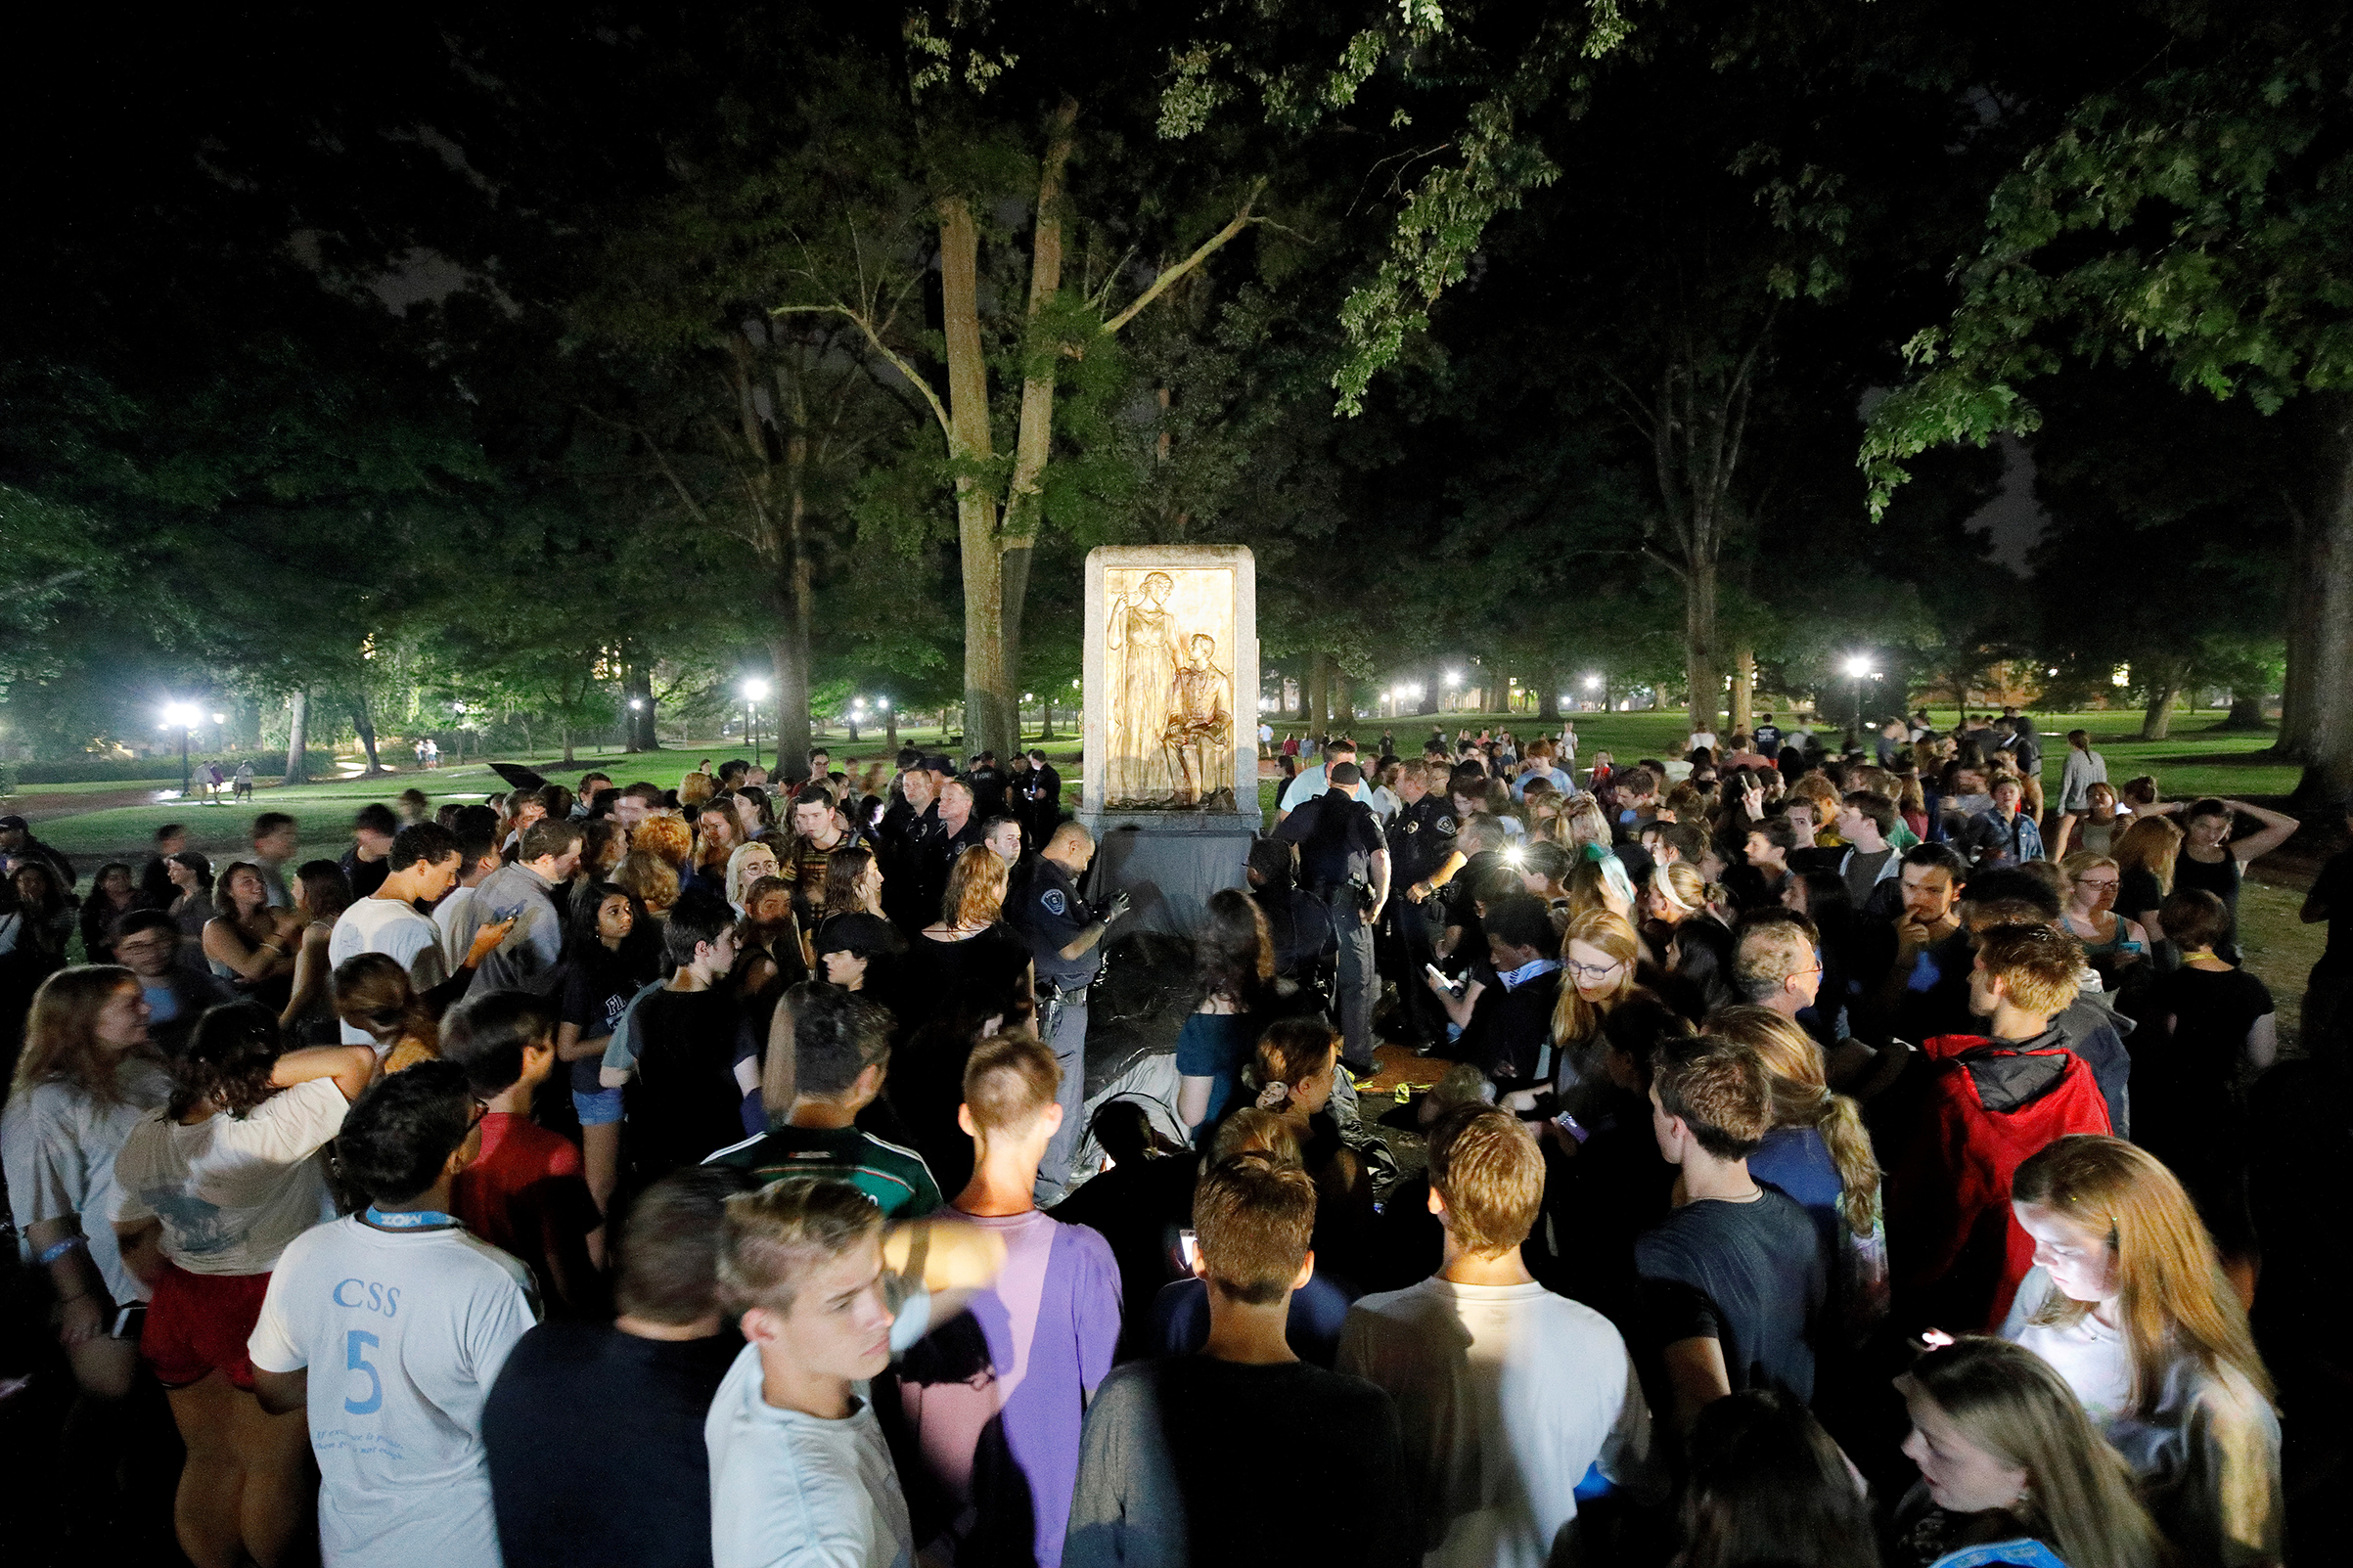 Students and protesters surround the plinth where the toppled statue of a Confederate soldier nicknamed Silent Sam once stood on the University of North Carolina campus, after a demonstration for its removal in Chapel Hill, North Carolina, on Aug. 20, 2018. (Jonathan Drake&mdash;REUTERS)